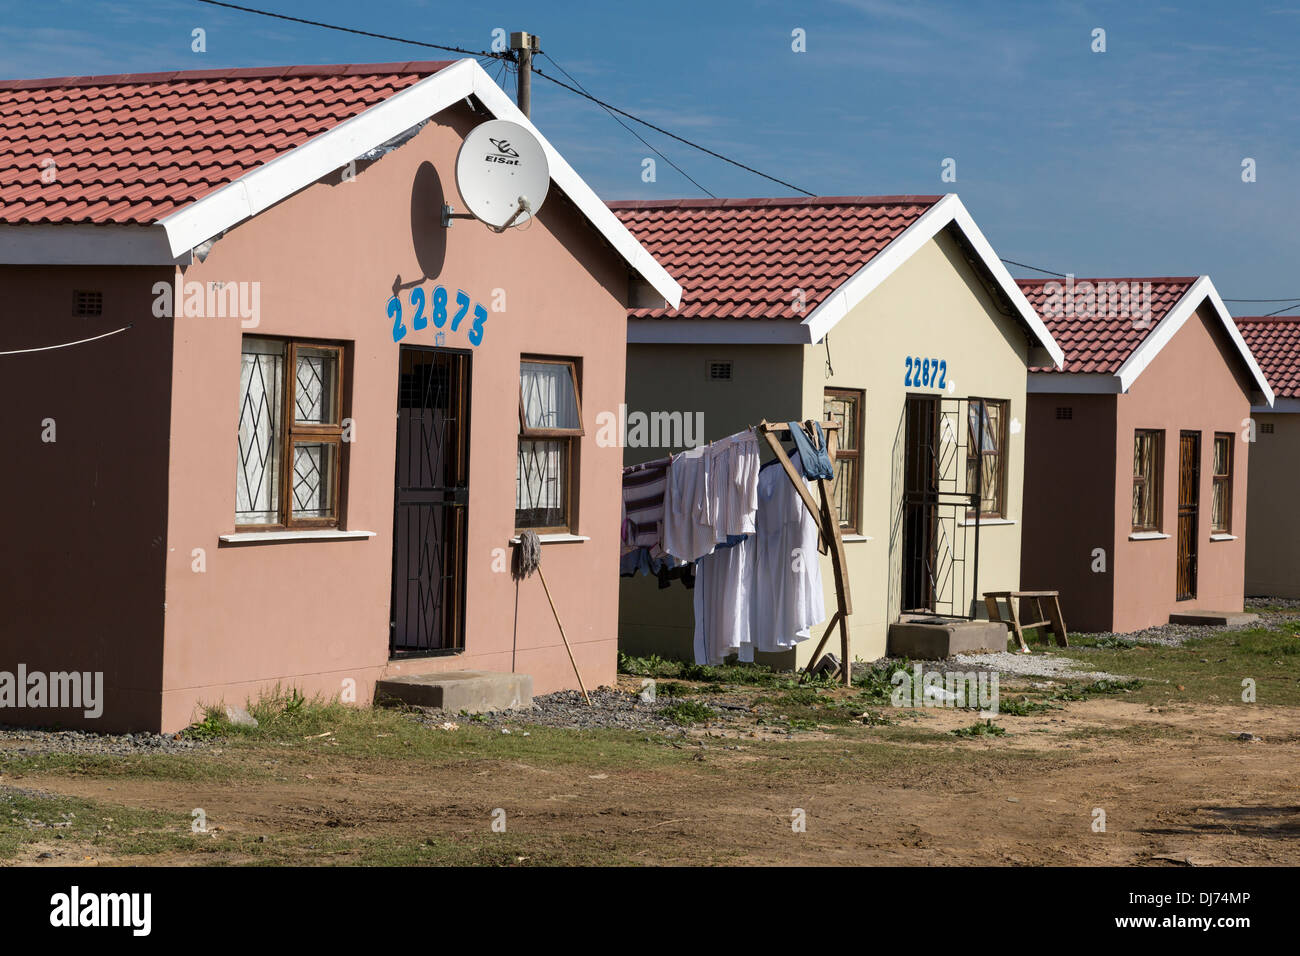 South Africa, Cape Town. New Houses, Wallacedene Township, Kraaifontein, a suburb of Cape Town. Stock Photo